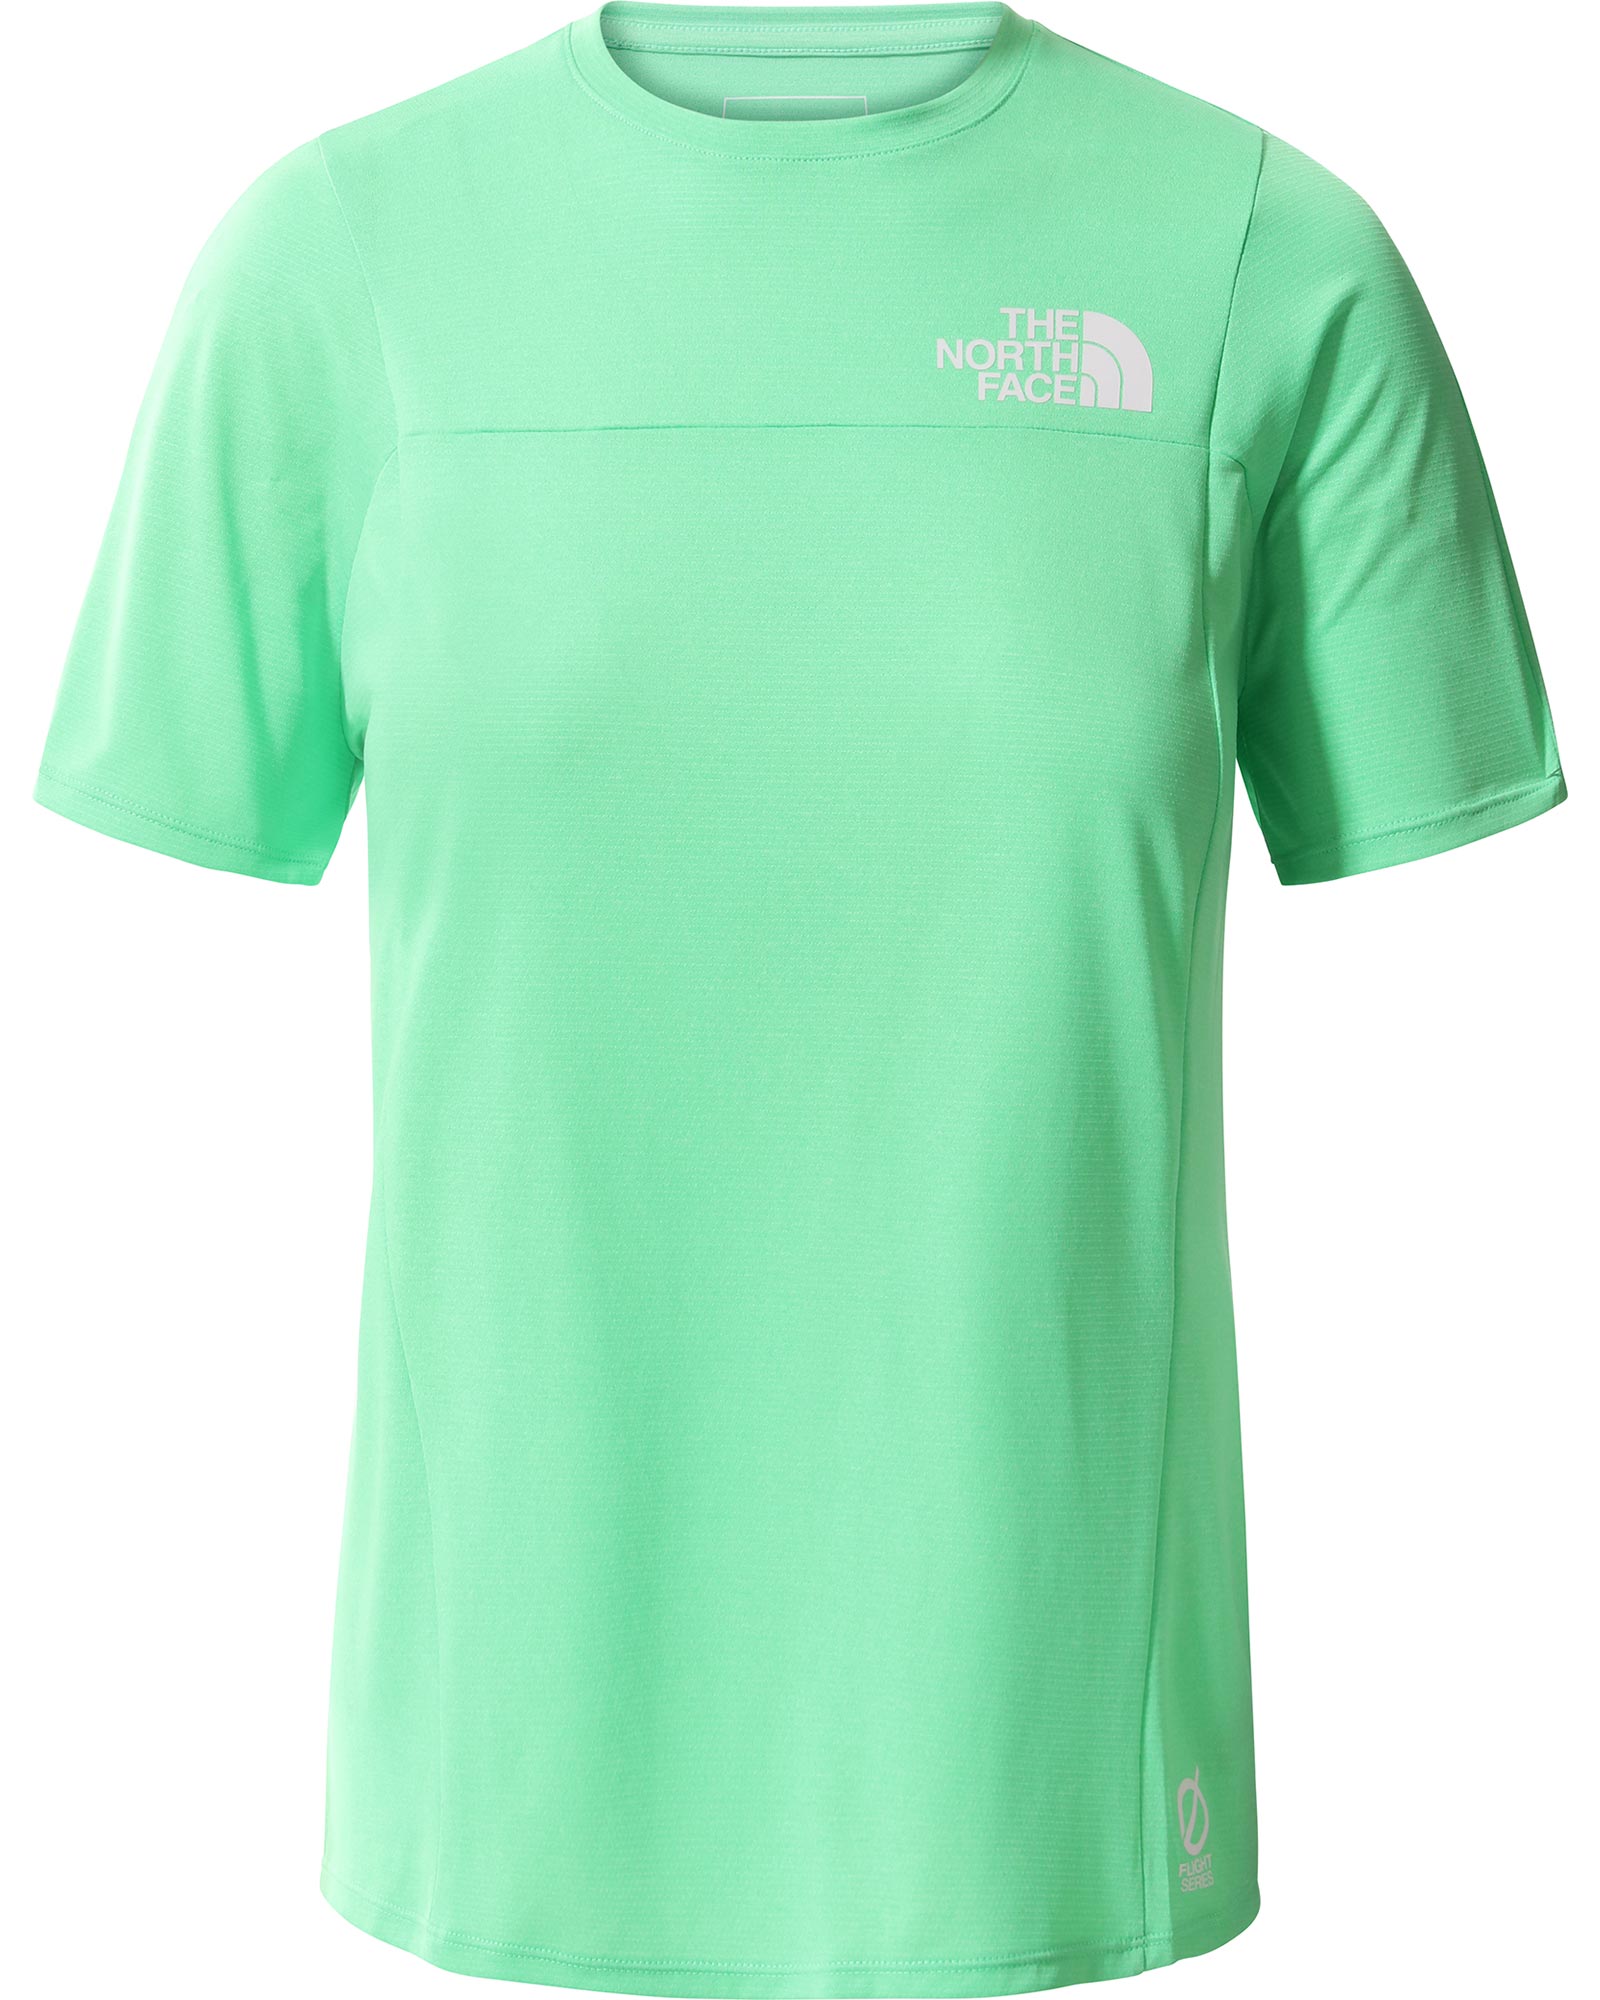 The North Face Flight Better Than Naked Women’s T Shirt - Chlorophyll Green S